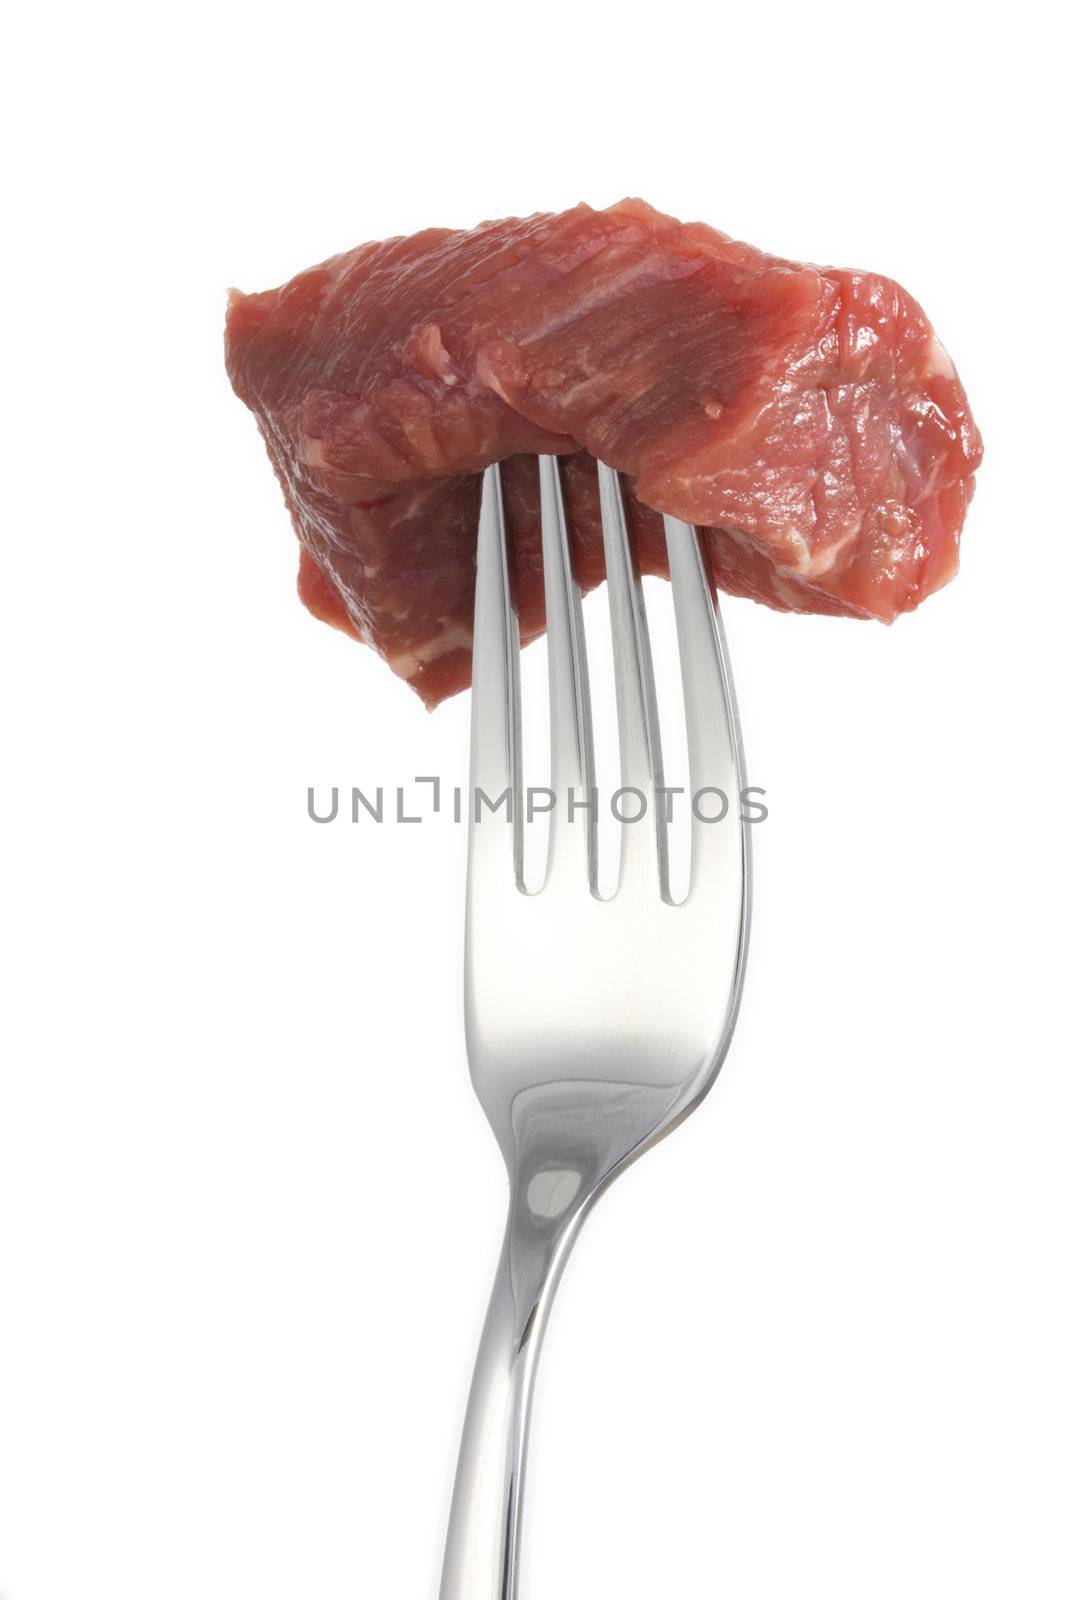 piece of meat on a fork isolated on white background by bernjuer